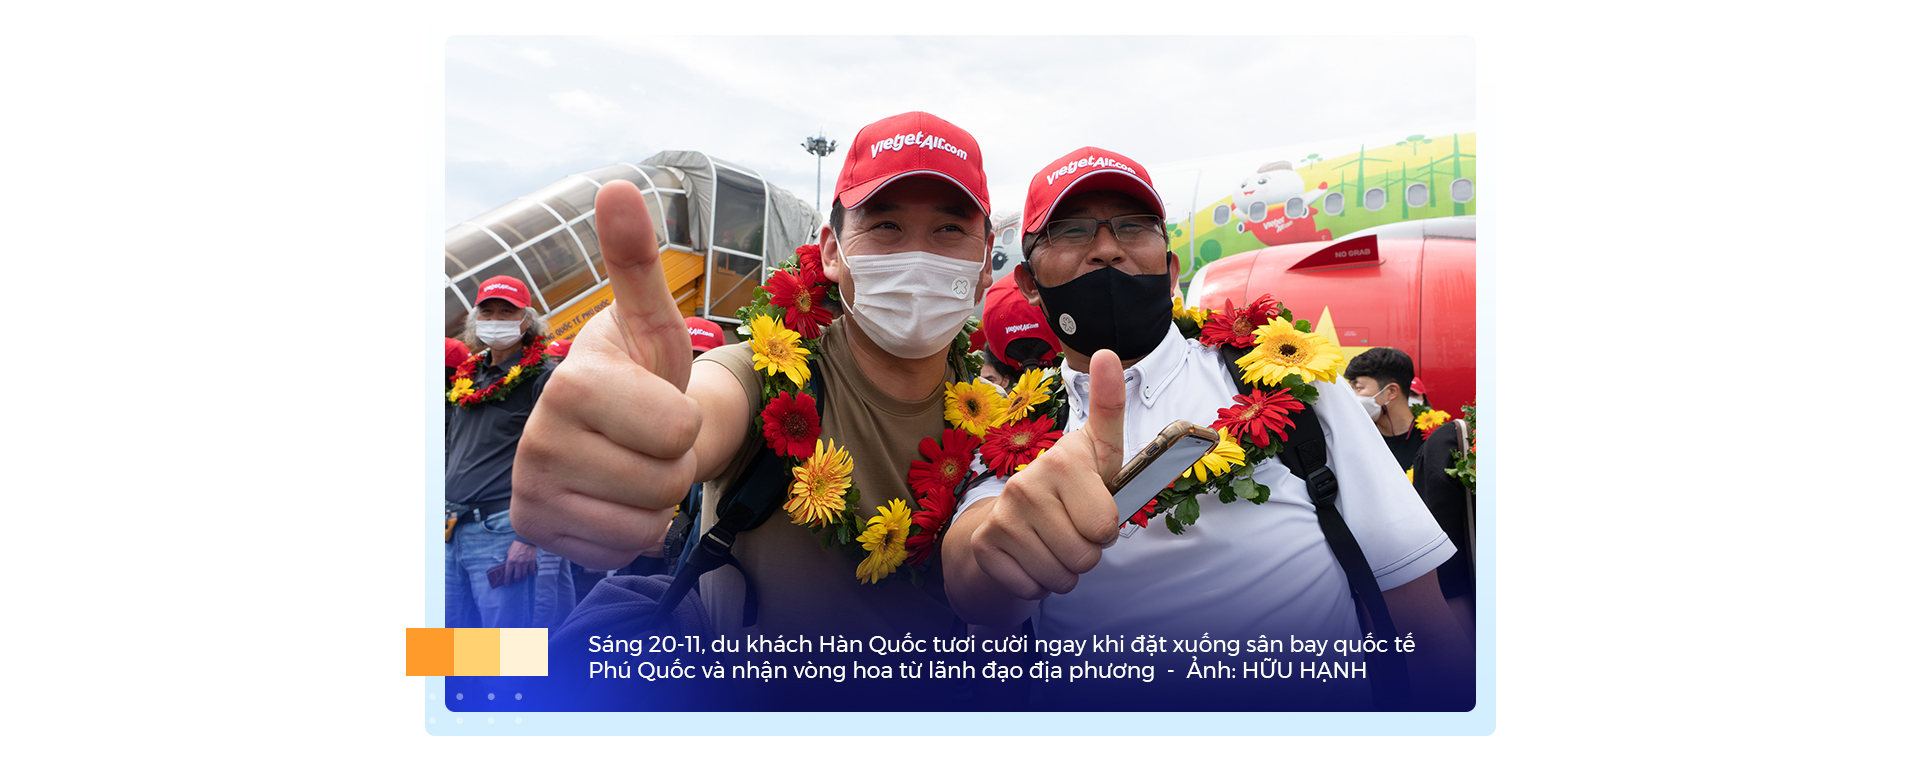 Two South Korean tourists pose for a photo upon their arrival at Phu Quoc City off Kien Giang Province in Vietnam, November 20, 2021. Photo: Huu Hanh / Tuoi Tre